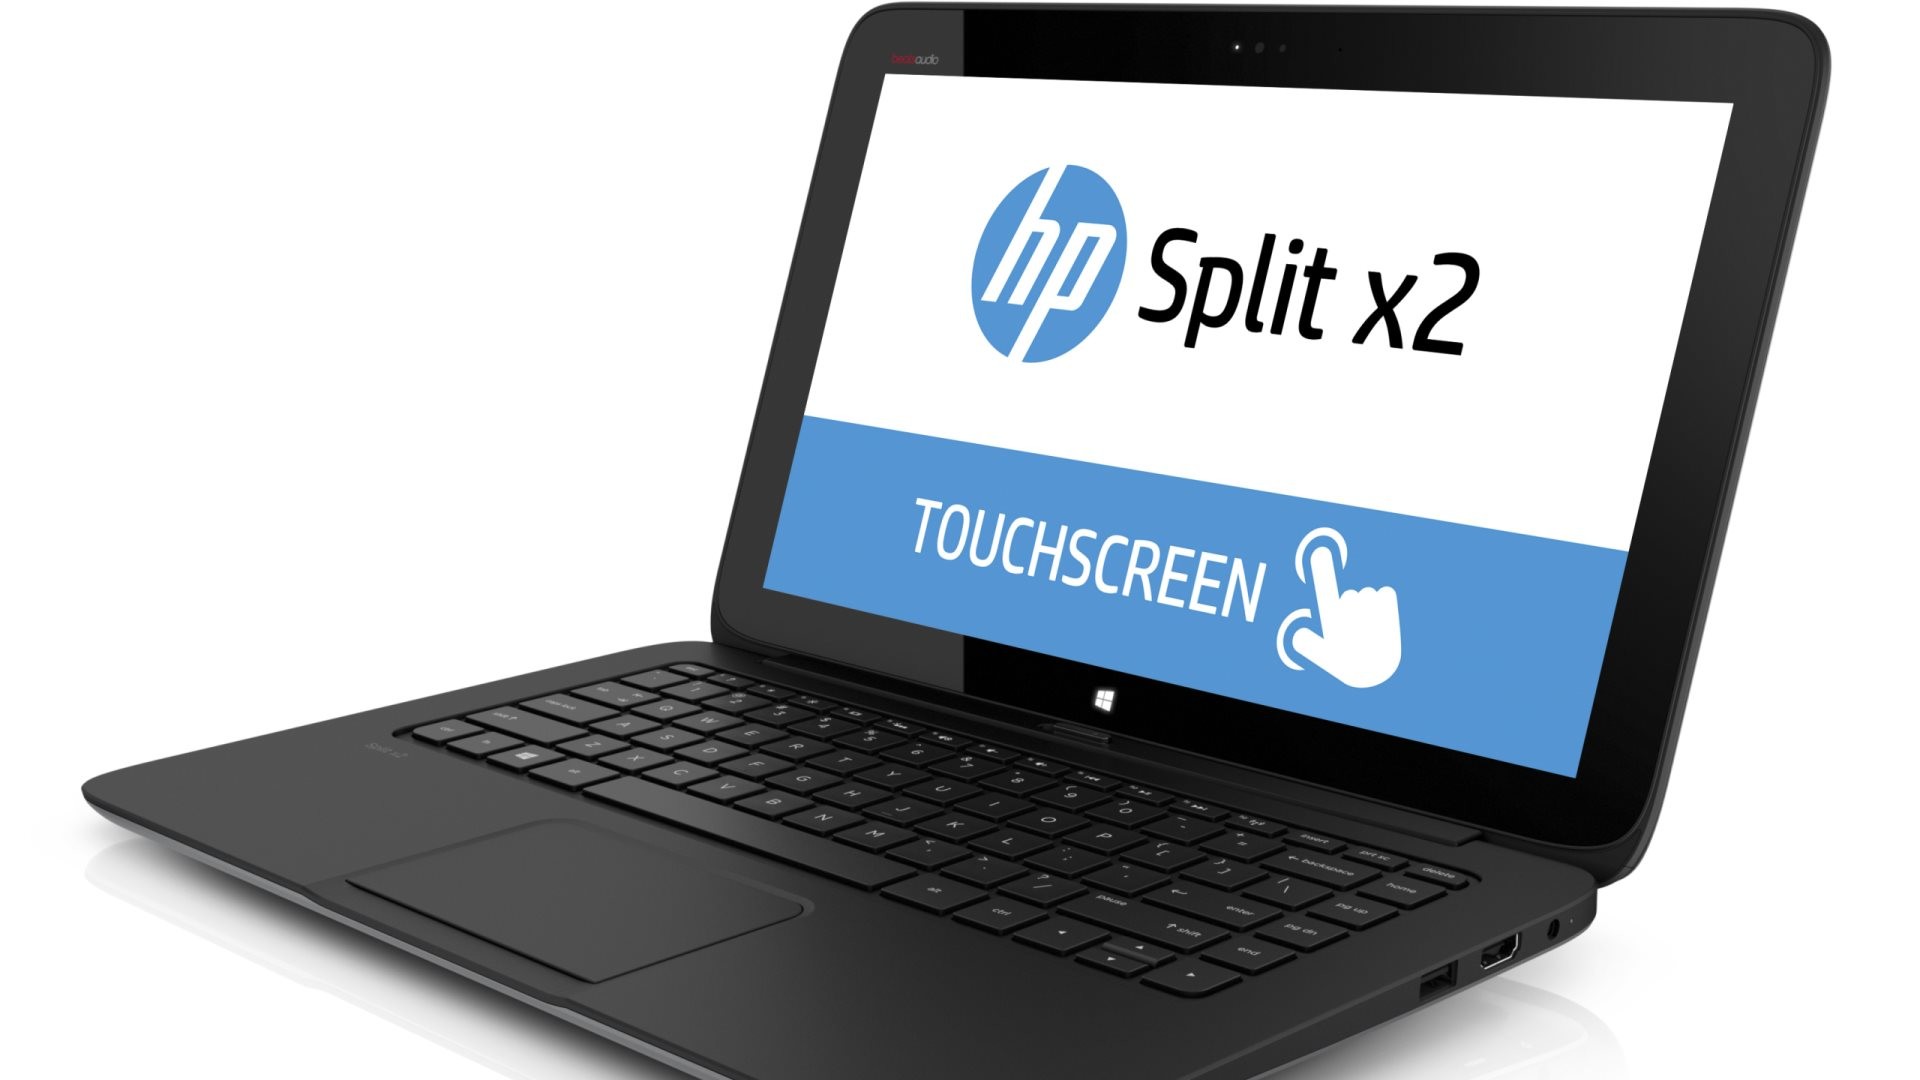 1920x1080 HD Wallpaper: Hewlett-Packard Split x2 tablet notebook has a 2-in-1 design  to easily go from a powerful notebook to a portable tablet. Widescreen ...